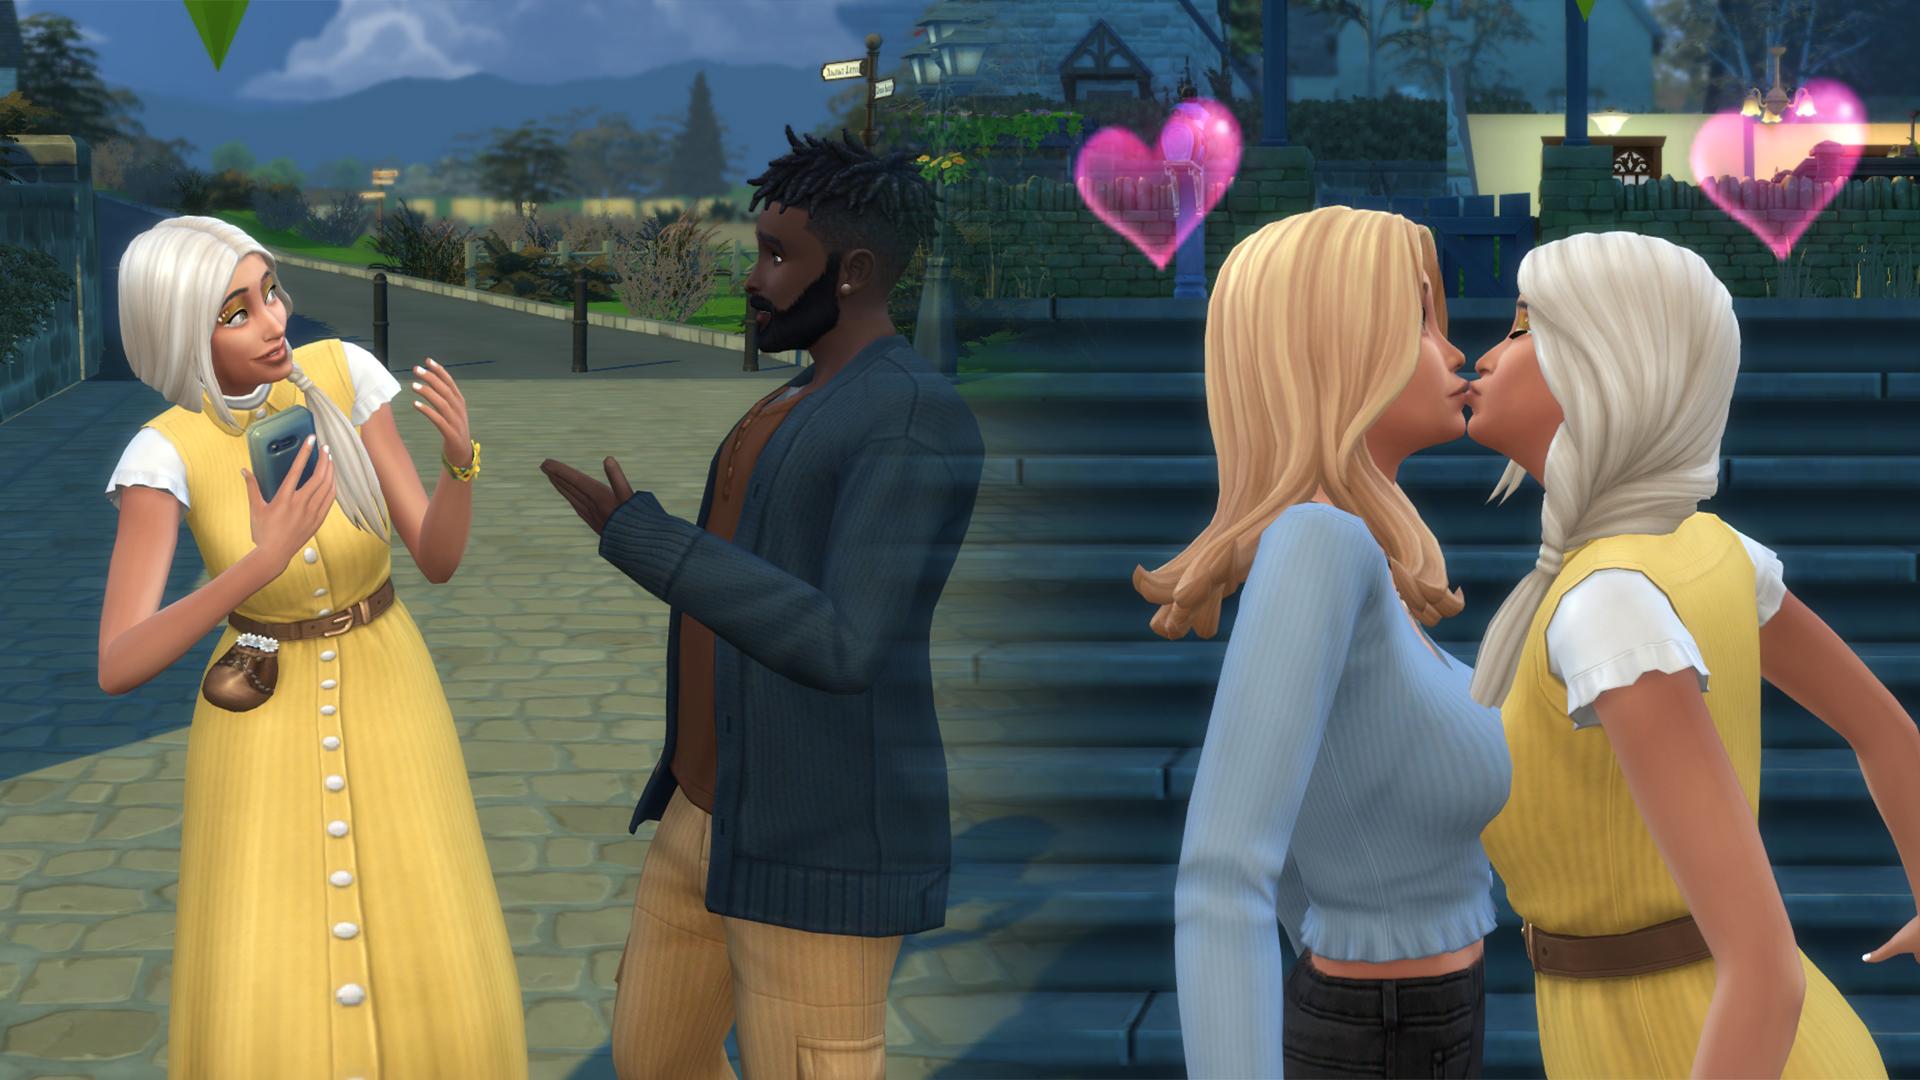 The Sims 4 cheats and codes for money, skills, love and more